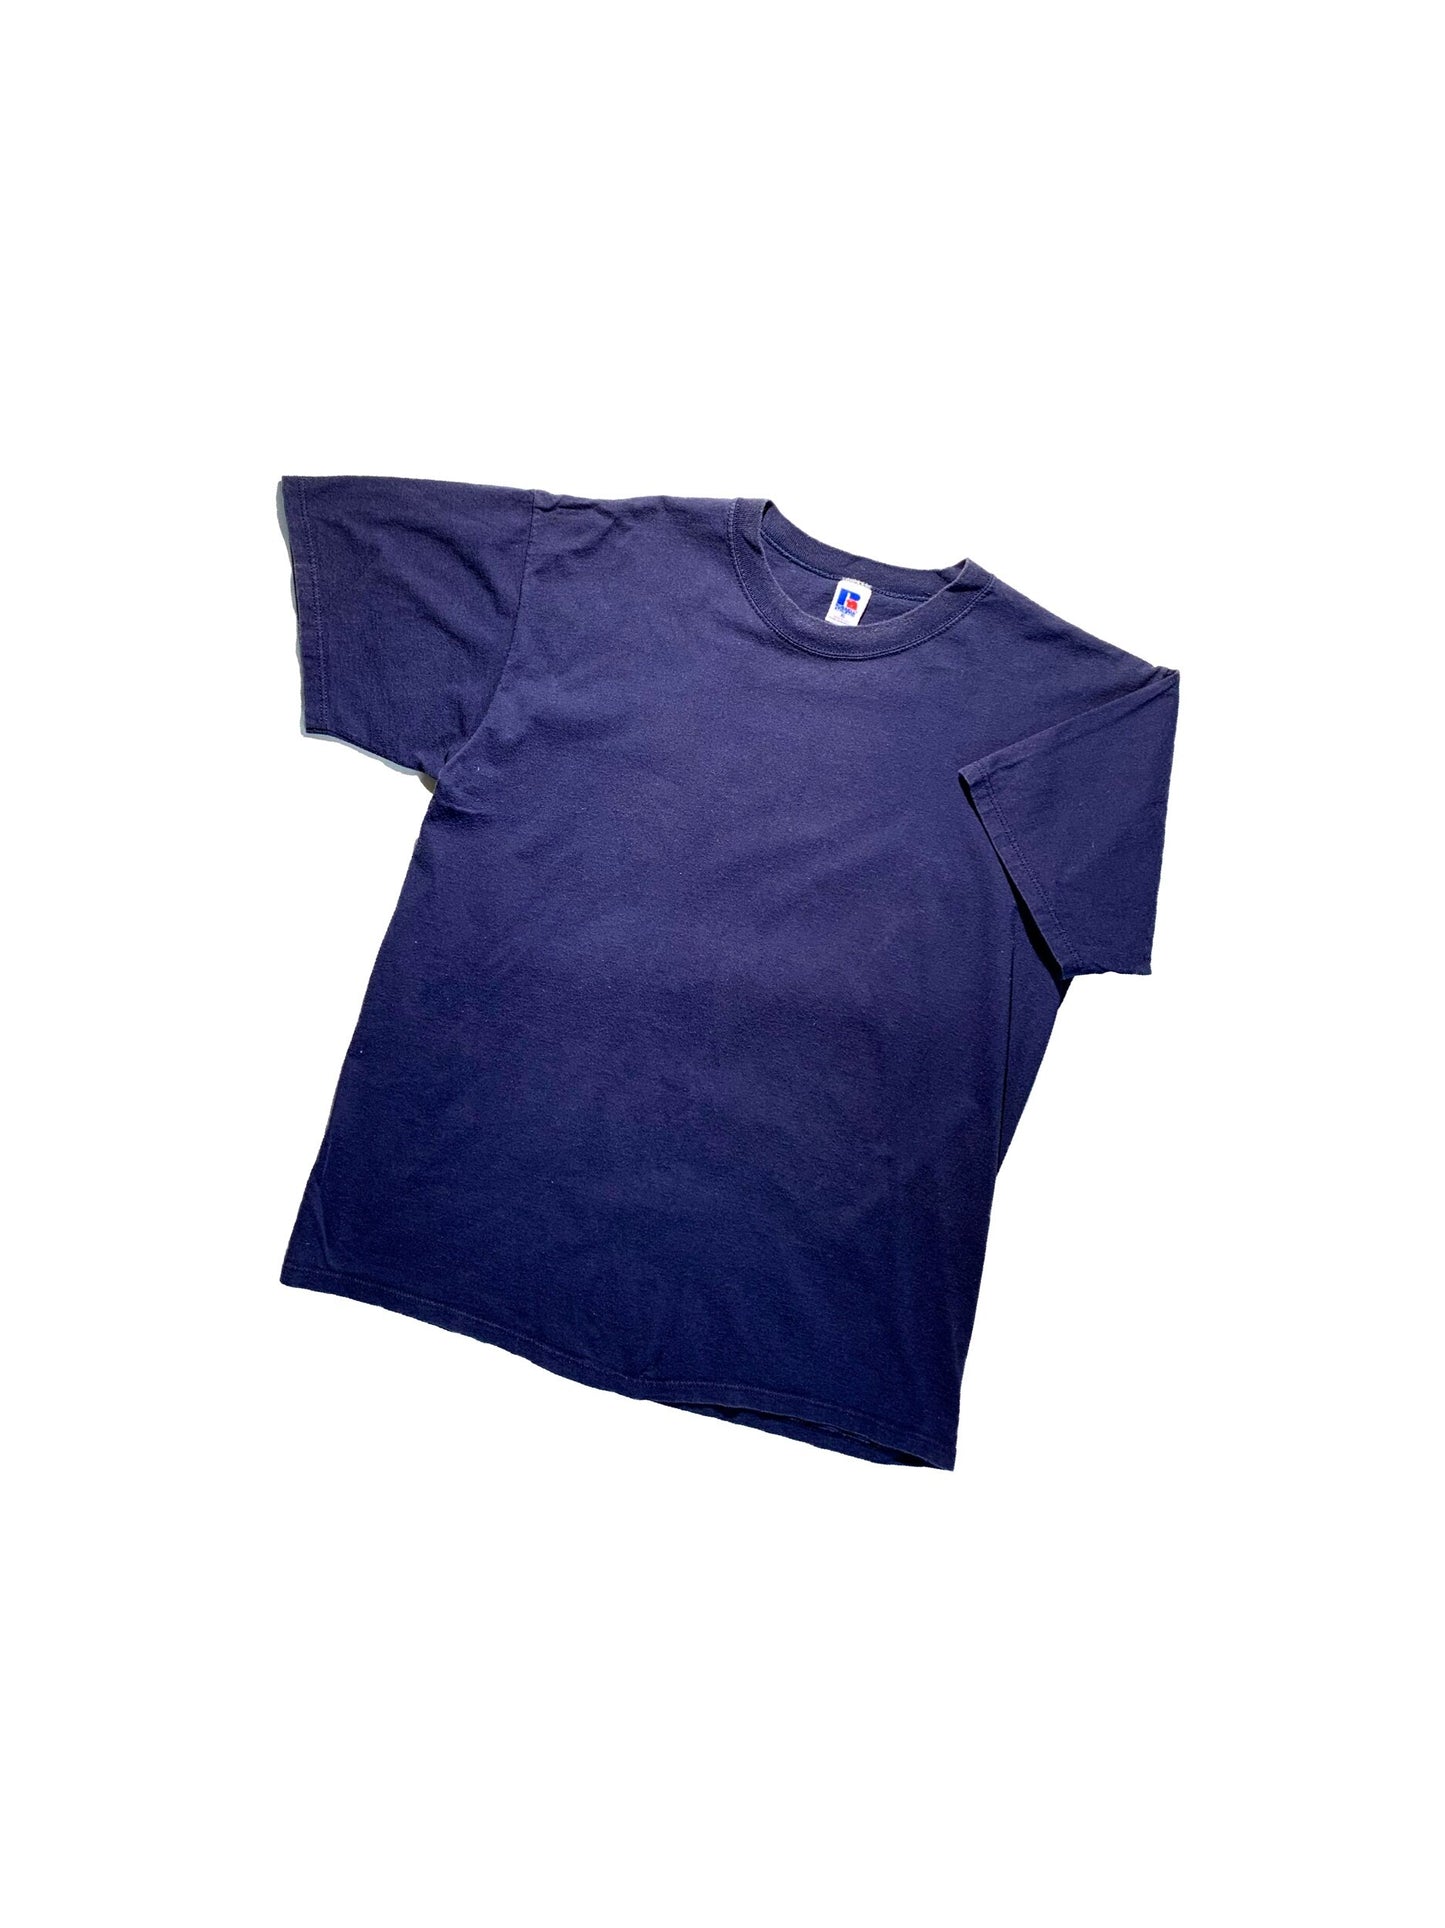 Vintage Navy Wash Russell Athletic T-Shirt